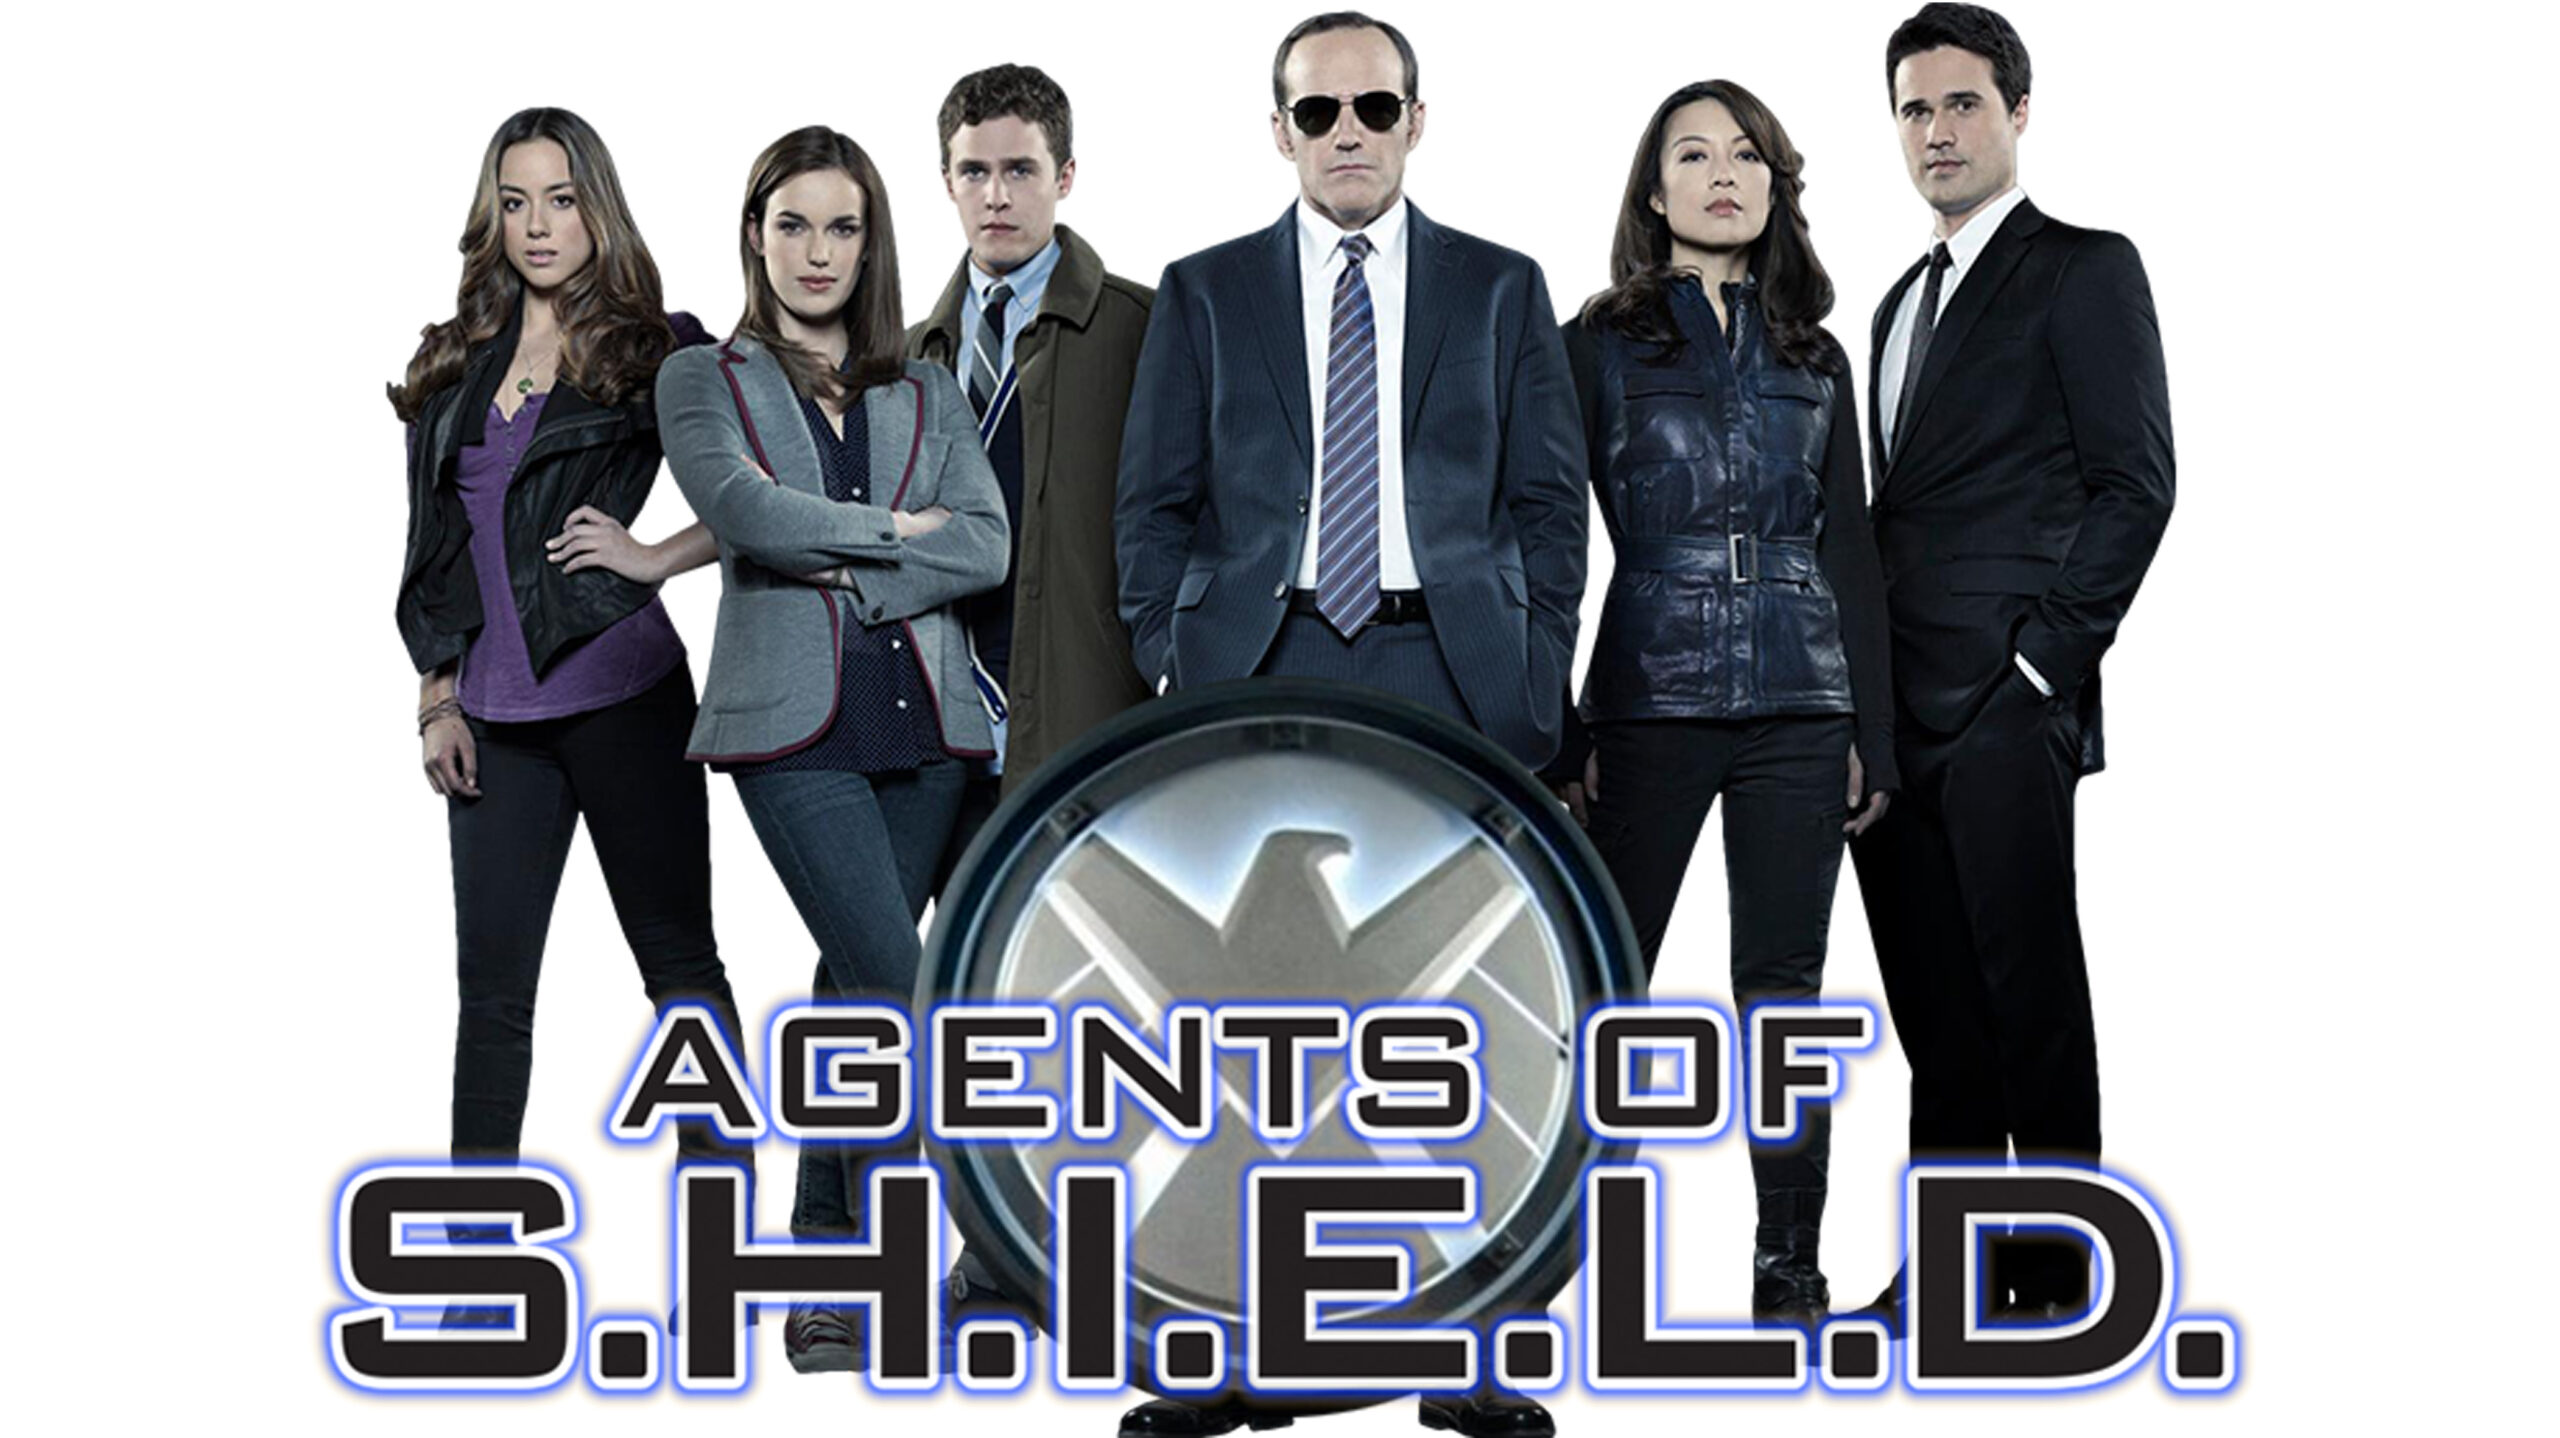 Agents of SHIELD T1 Podcast – PREVIOUSLY ON S02E11